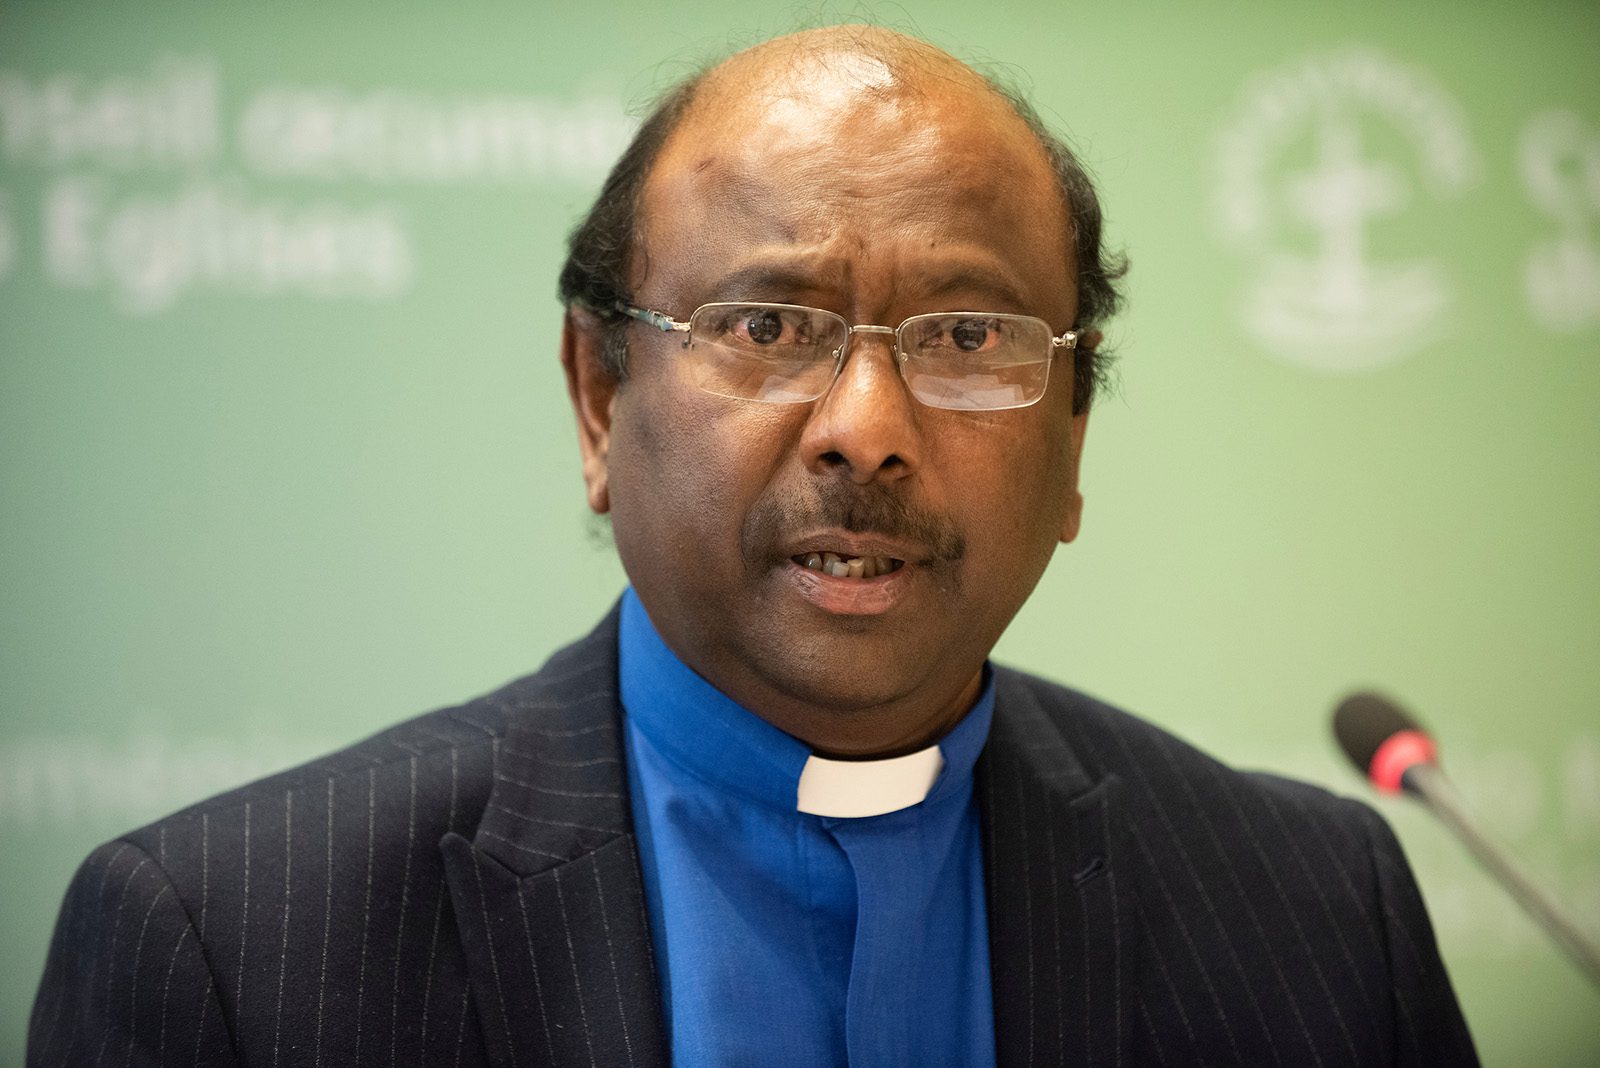 The Rev. Jerry Pillay, the new general secretary of the World Council of Churches, on June 17, 2022. Photo by Peter Williams/WCC